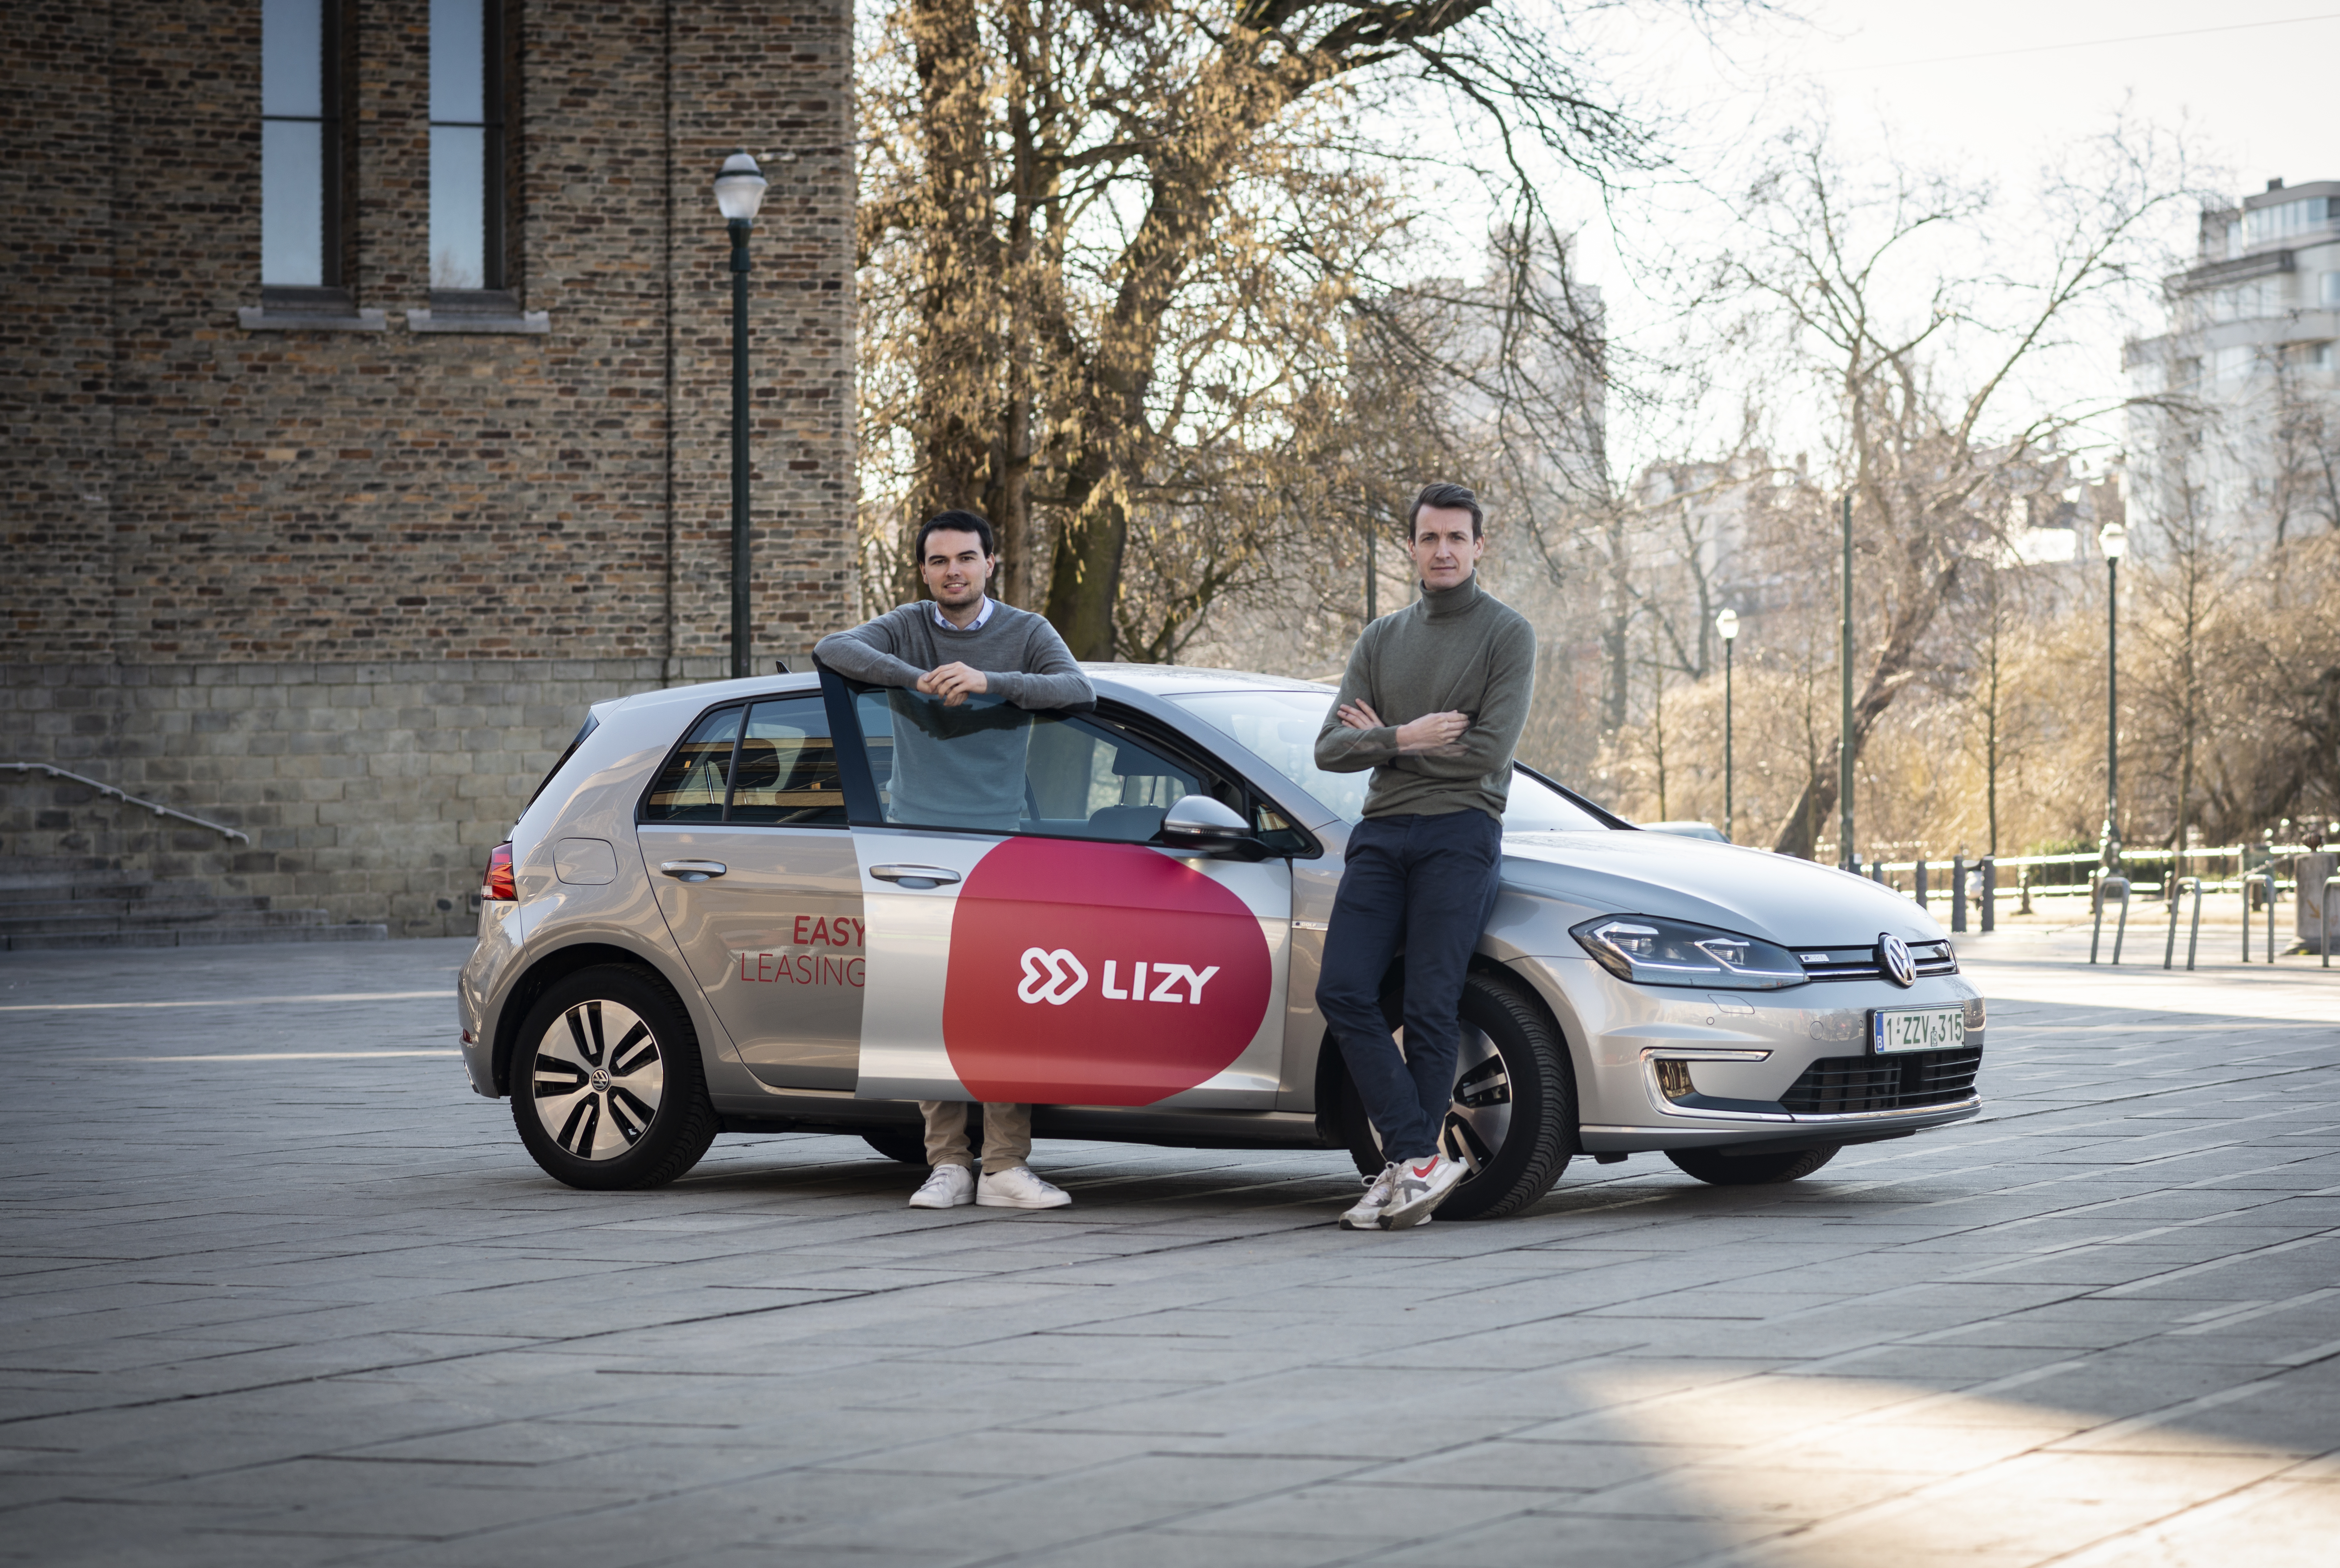 Used-car lease company Lizy refuels with another €1,5 million